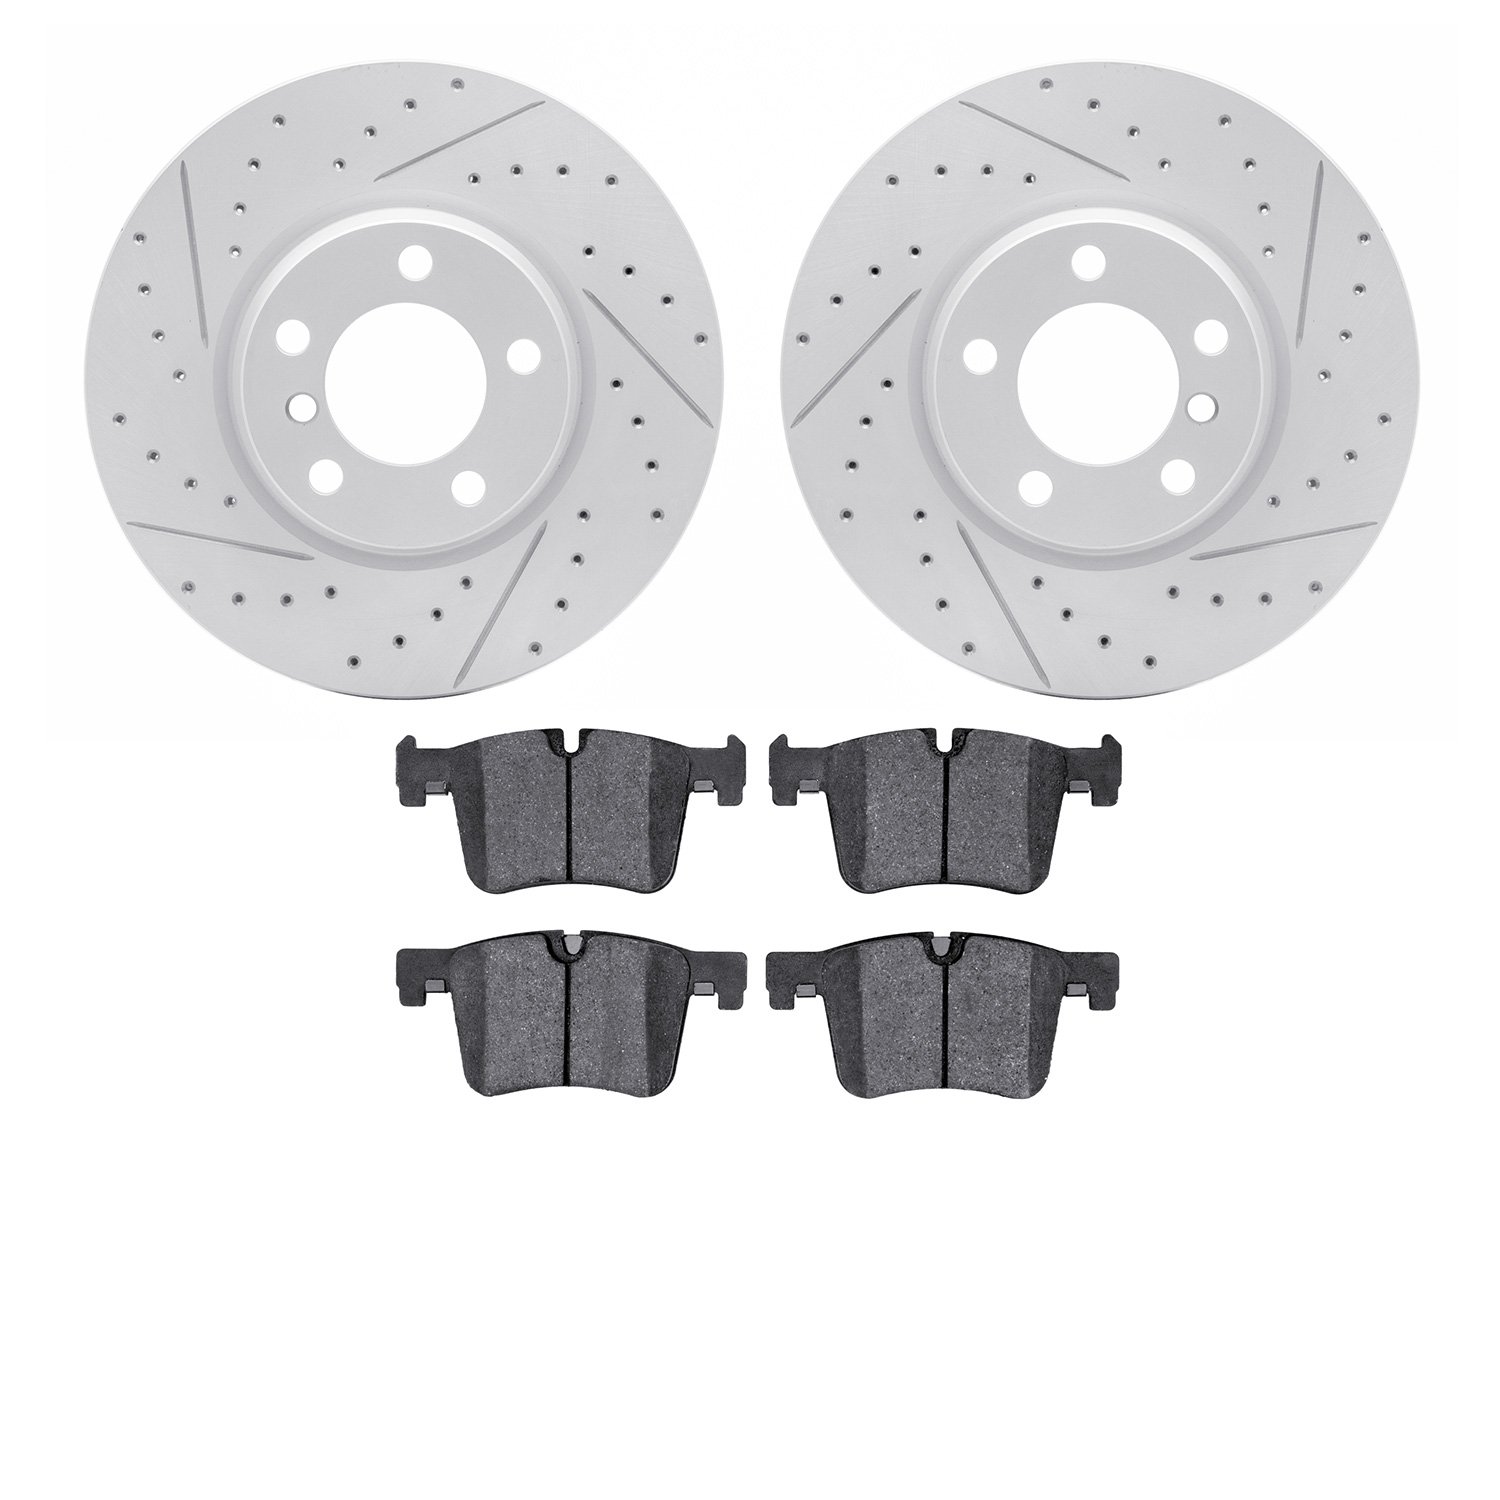 2502-31103 Geoperformance Drilled/Slotted Rotors w/5000 Advanced Brake Pads Kit, 2012-2018 BMW, Position: Front